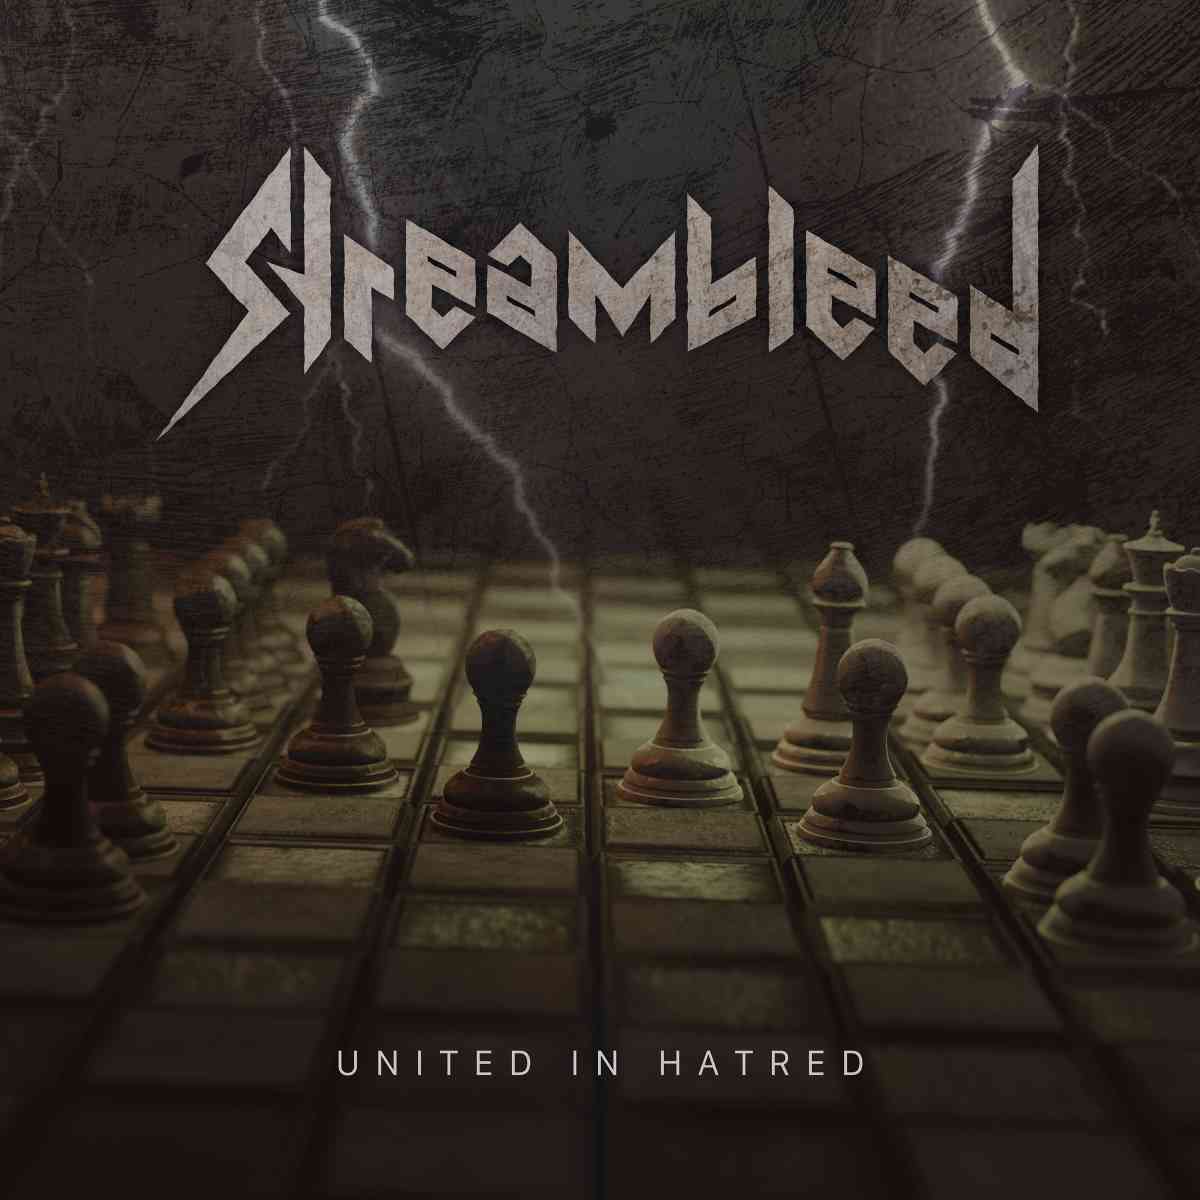 Streambleed - United in Hatred - album cover